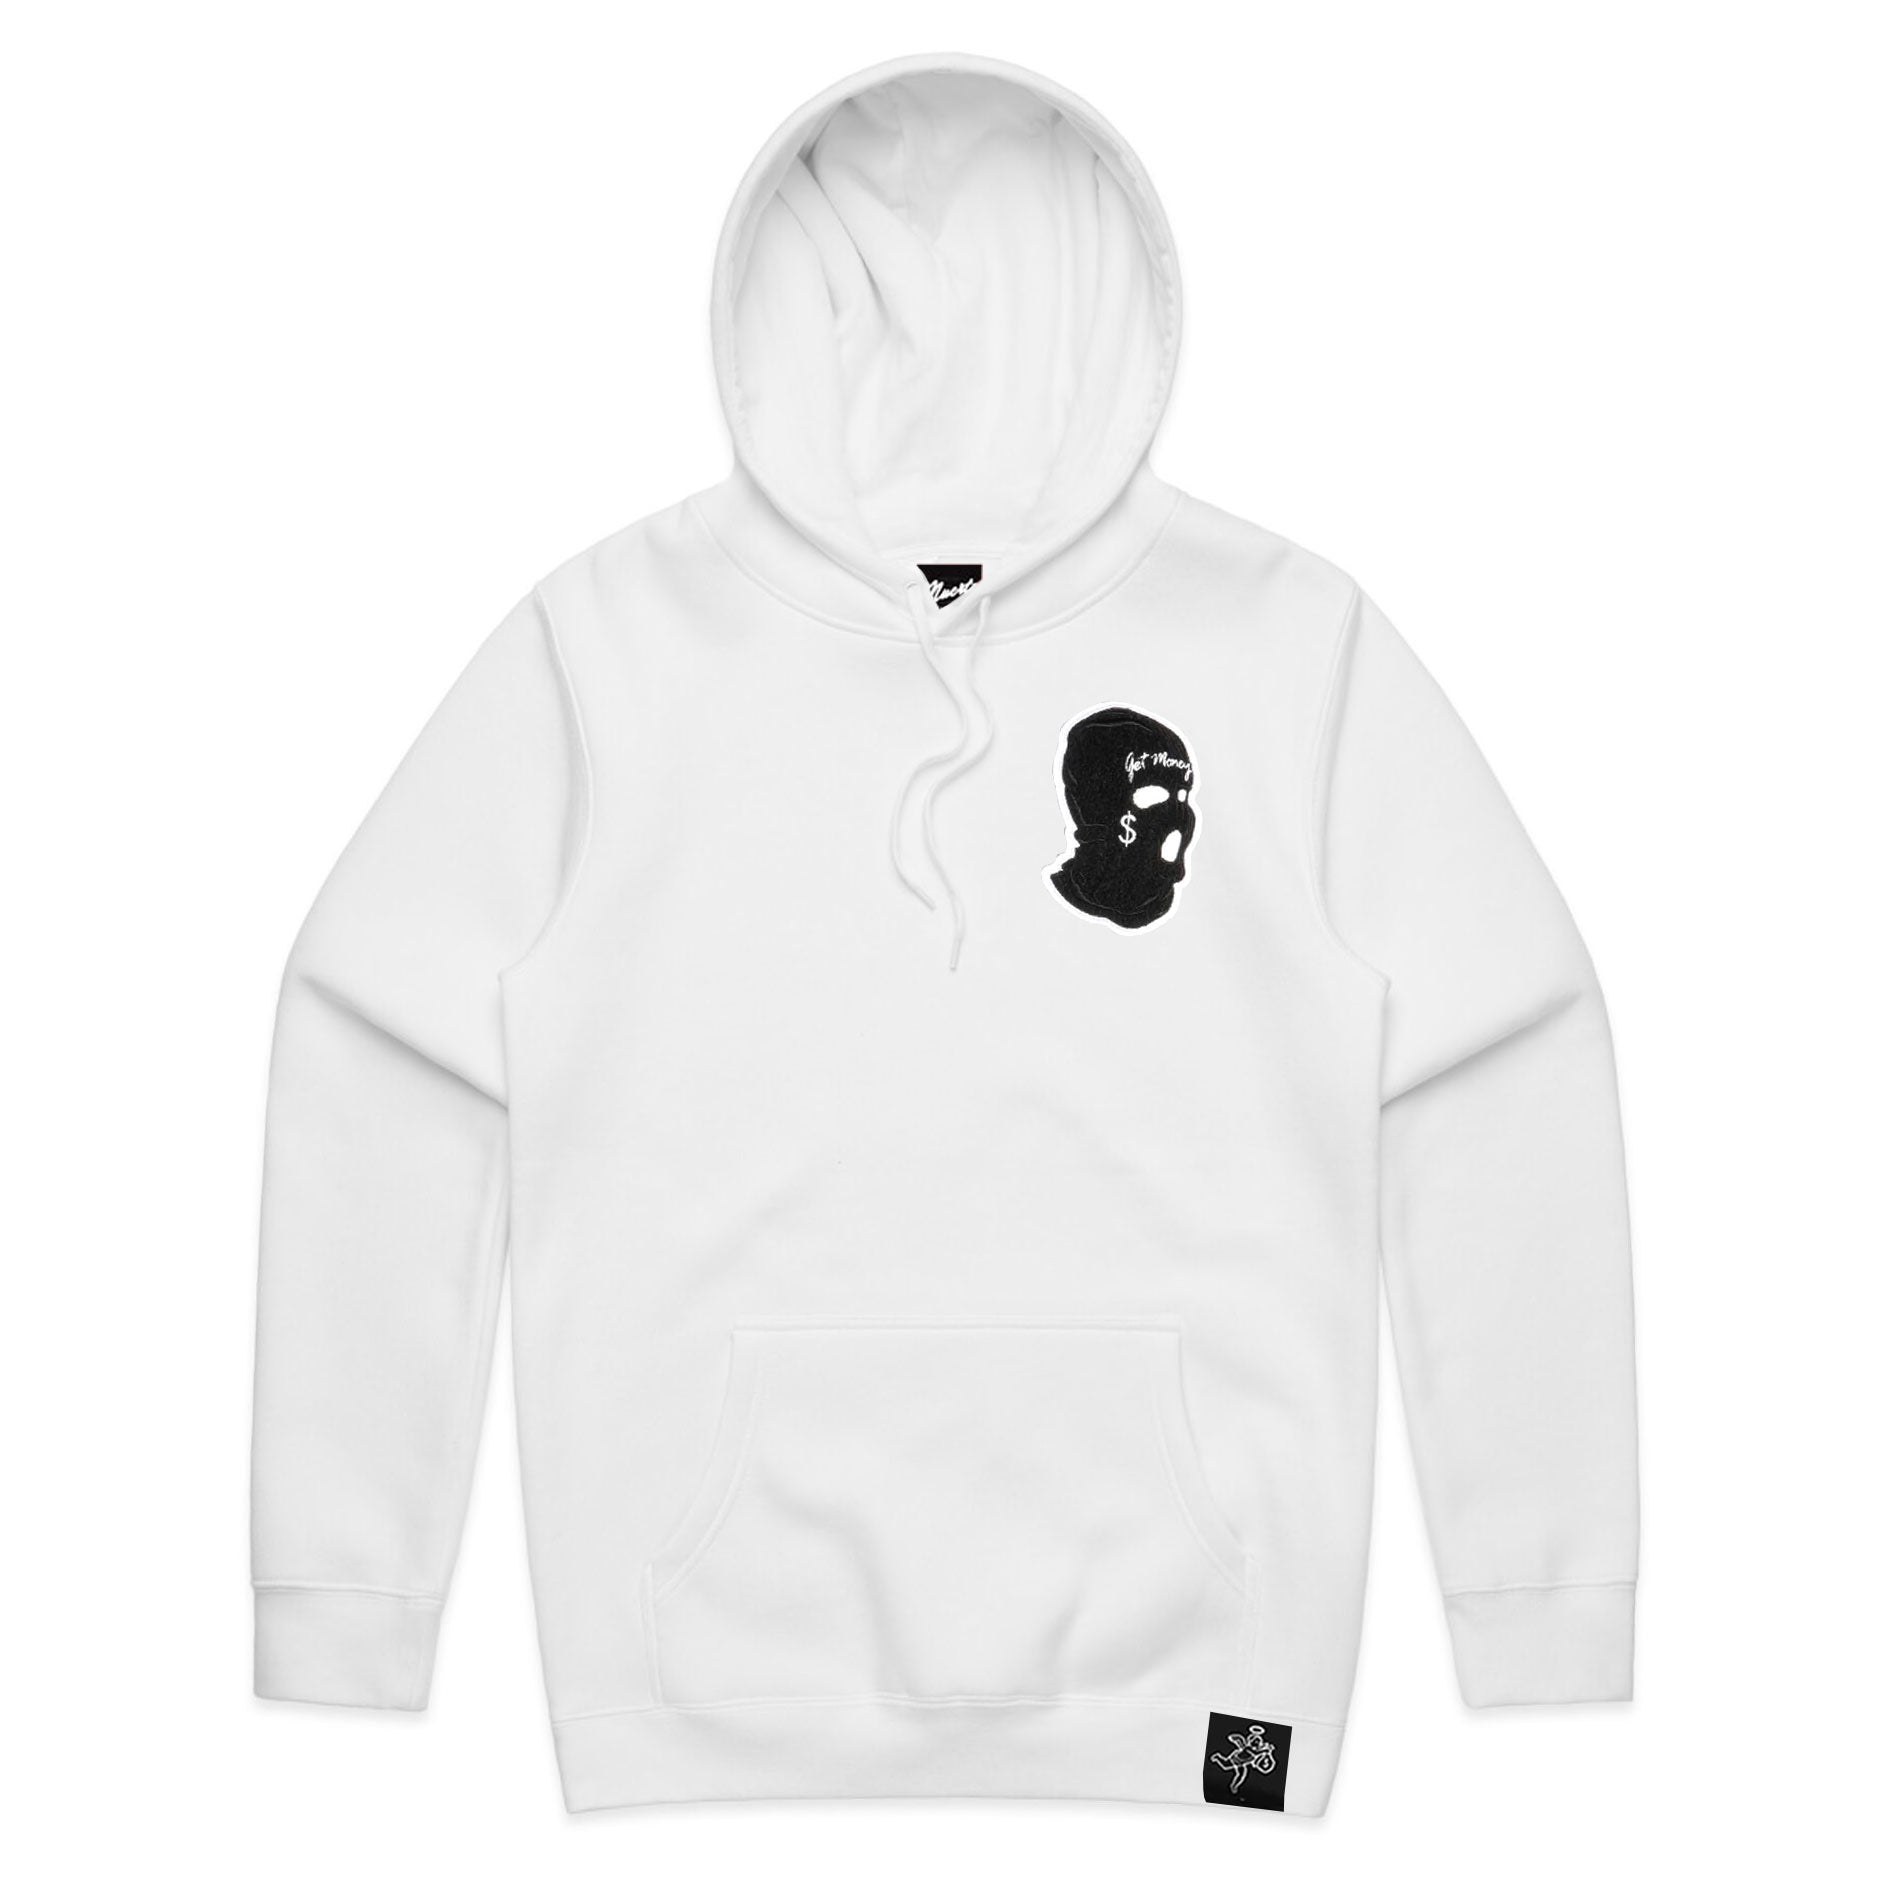 Ski Mask Chenille Patch Hoodie